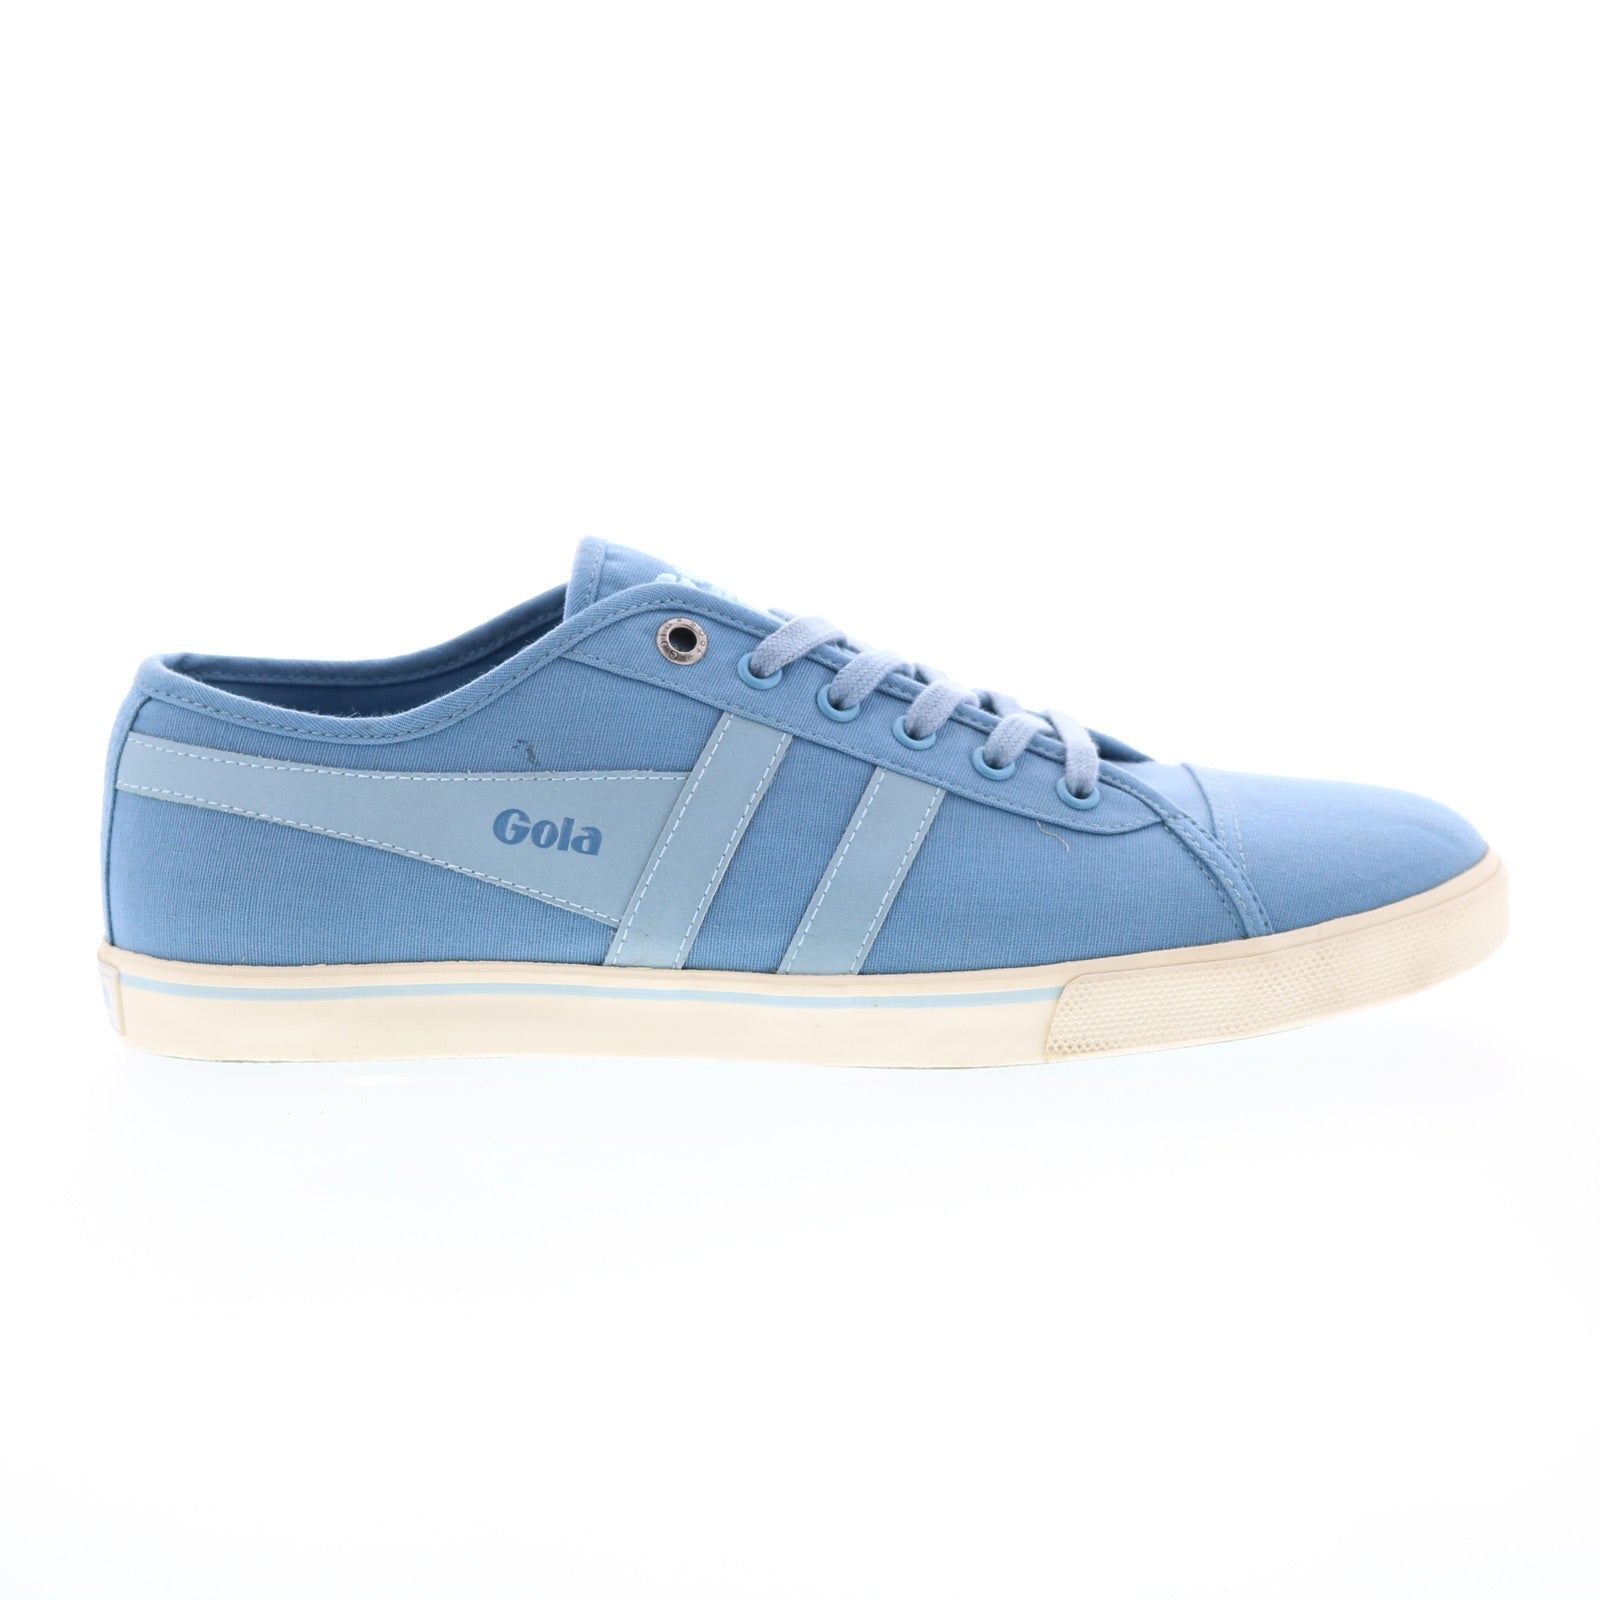 Gola Jasmine CLA818 Womens Blue Canvas Lace Up Lifestyle Sneakers Shoes